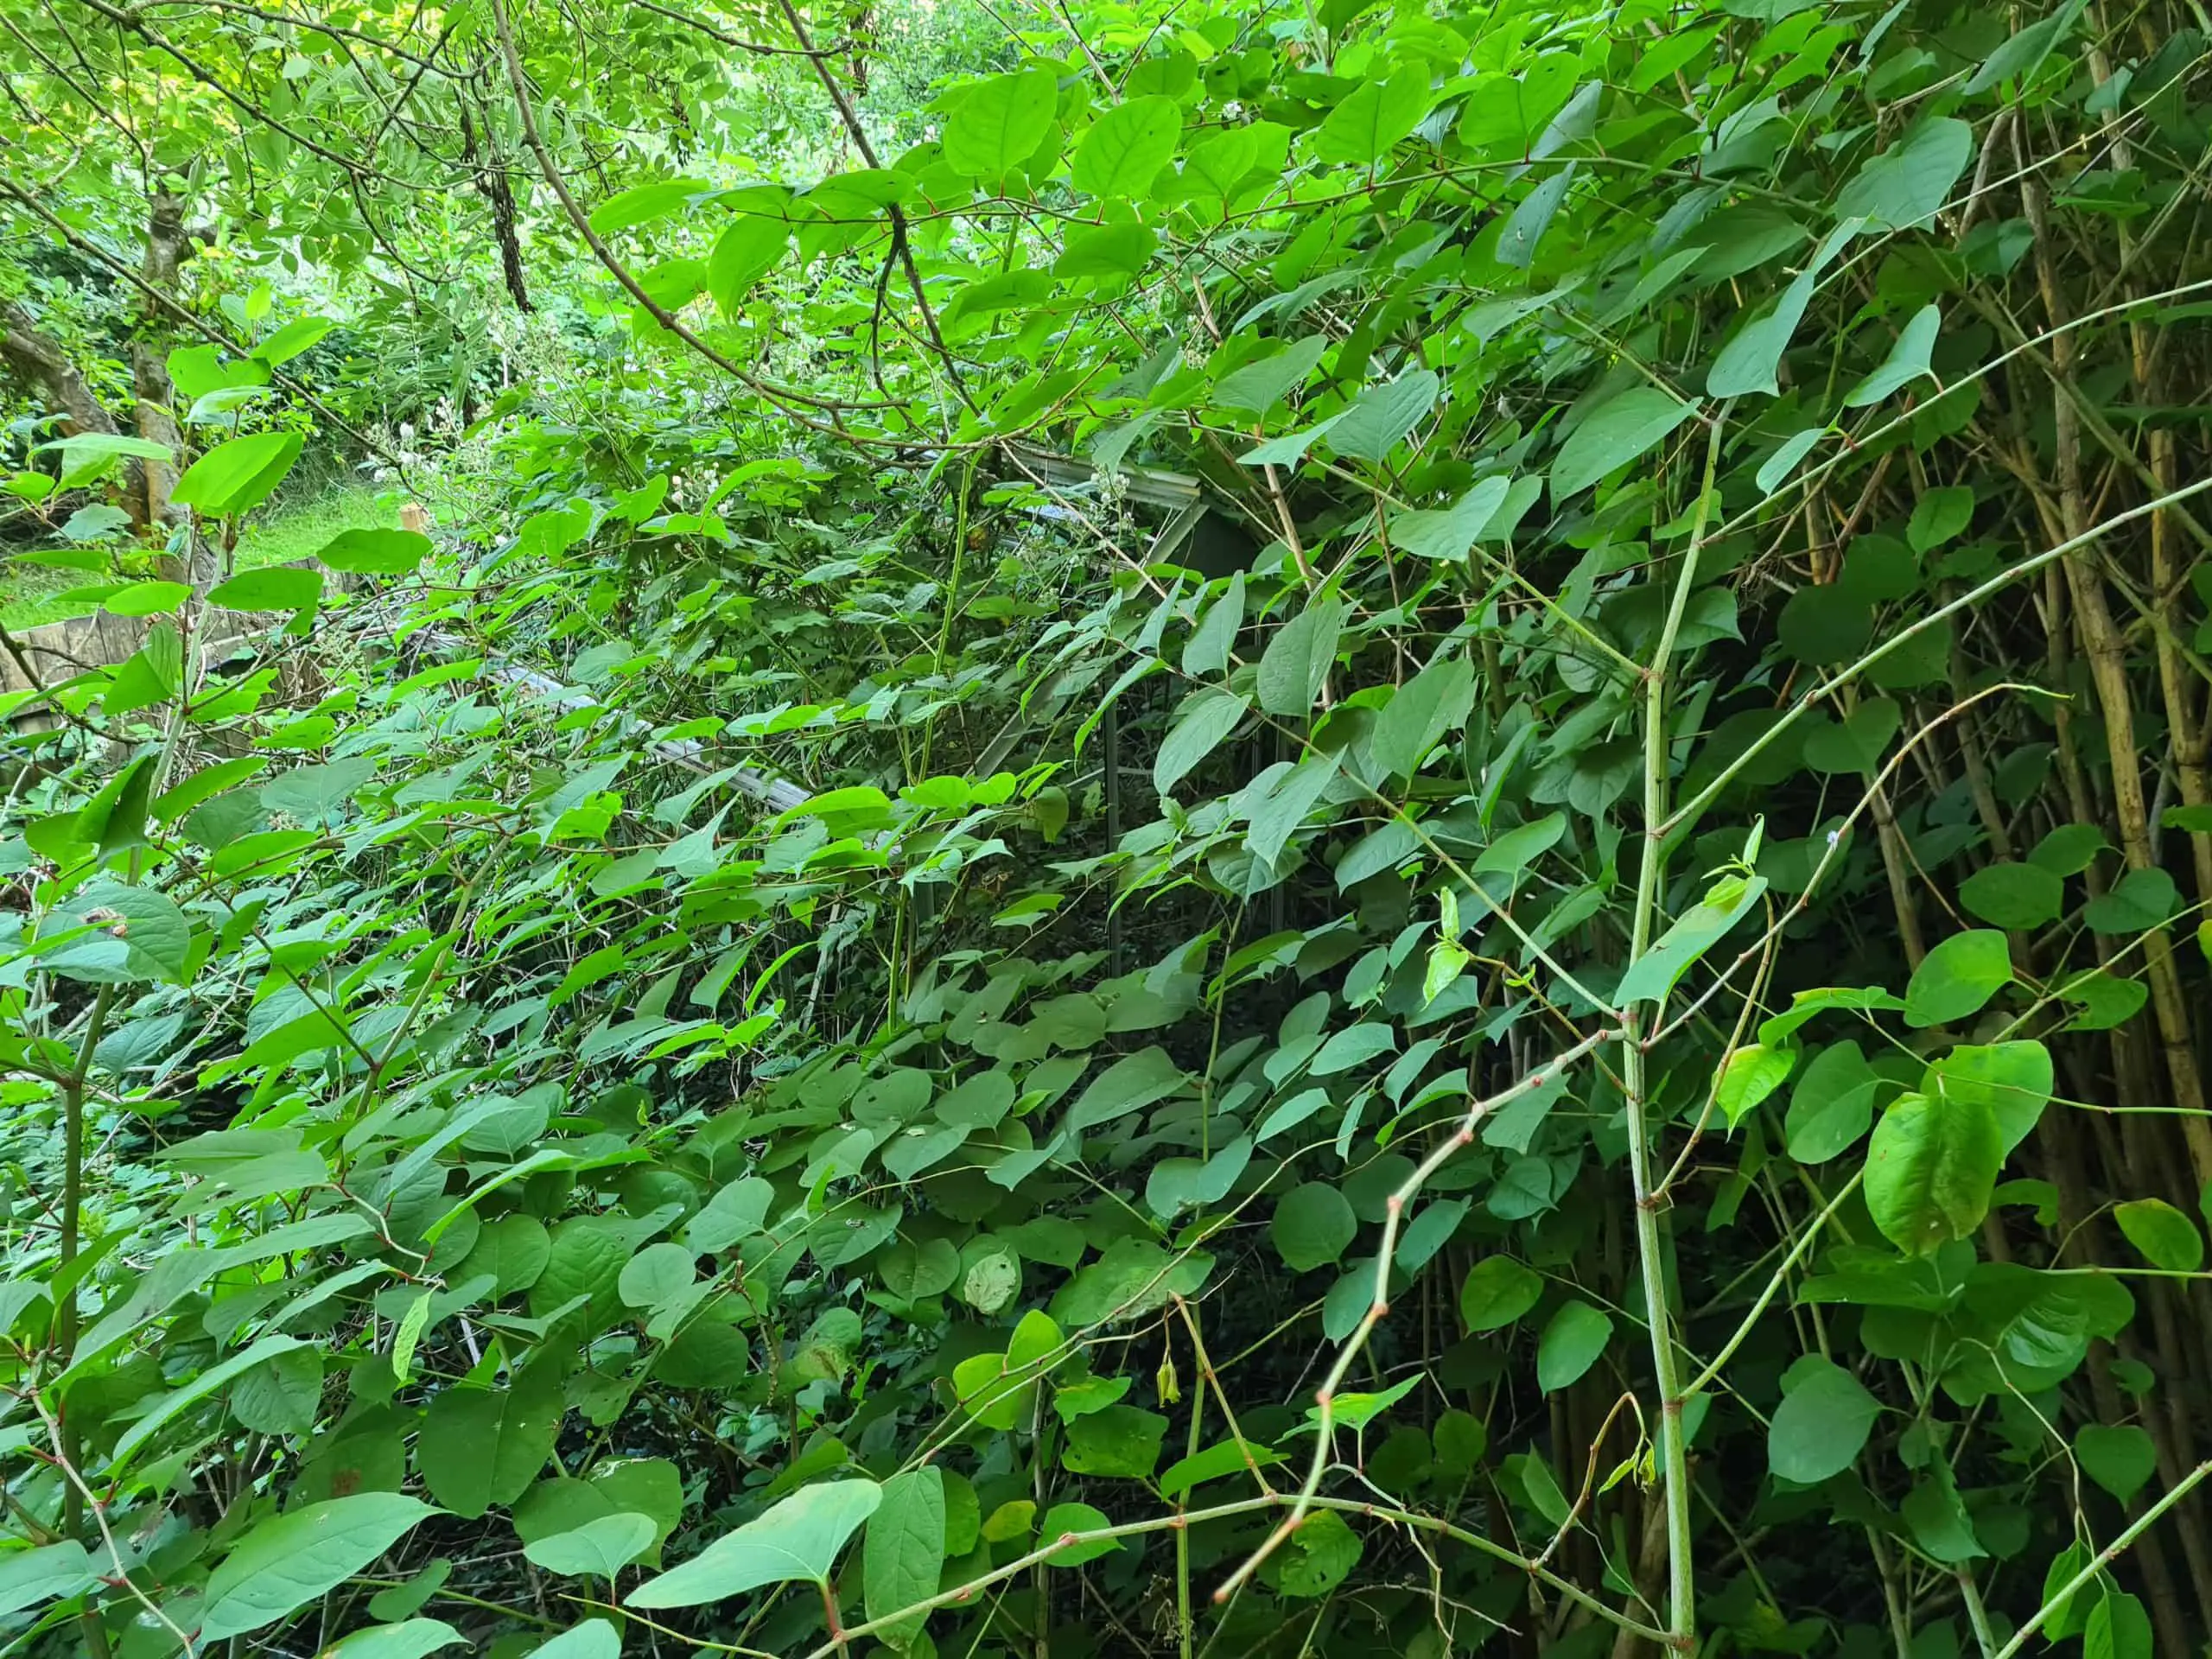 Know how to get rid of Japanese knotweed and the damage it will cause